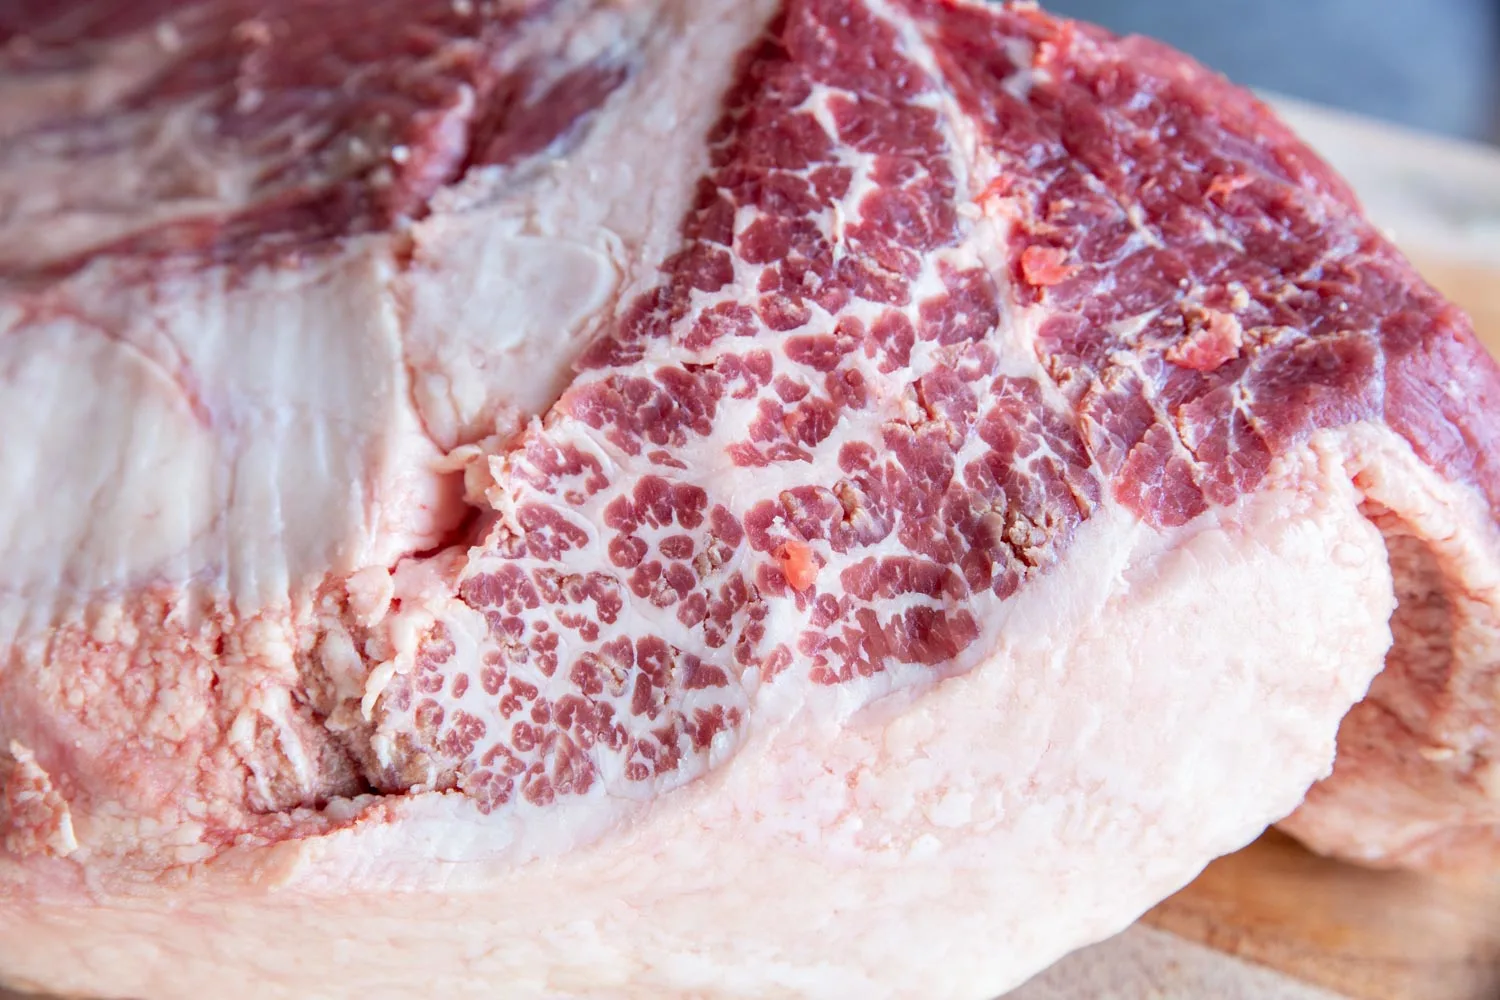 An example of a well marbled piece of meat with veins of fat running through the red muscle.